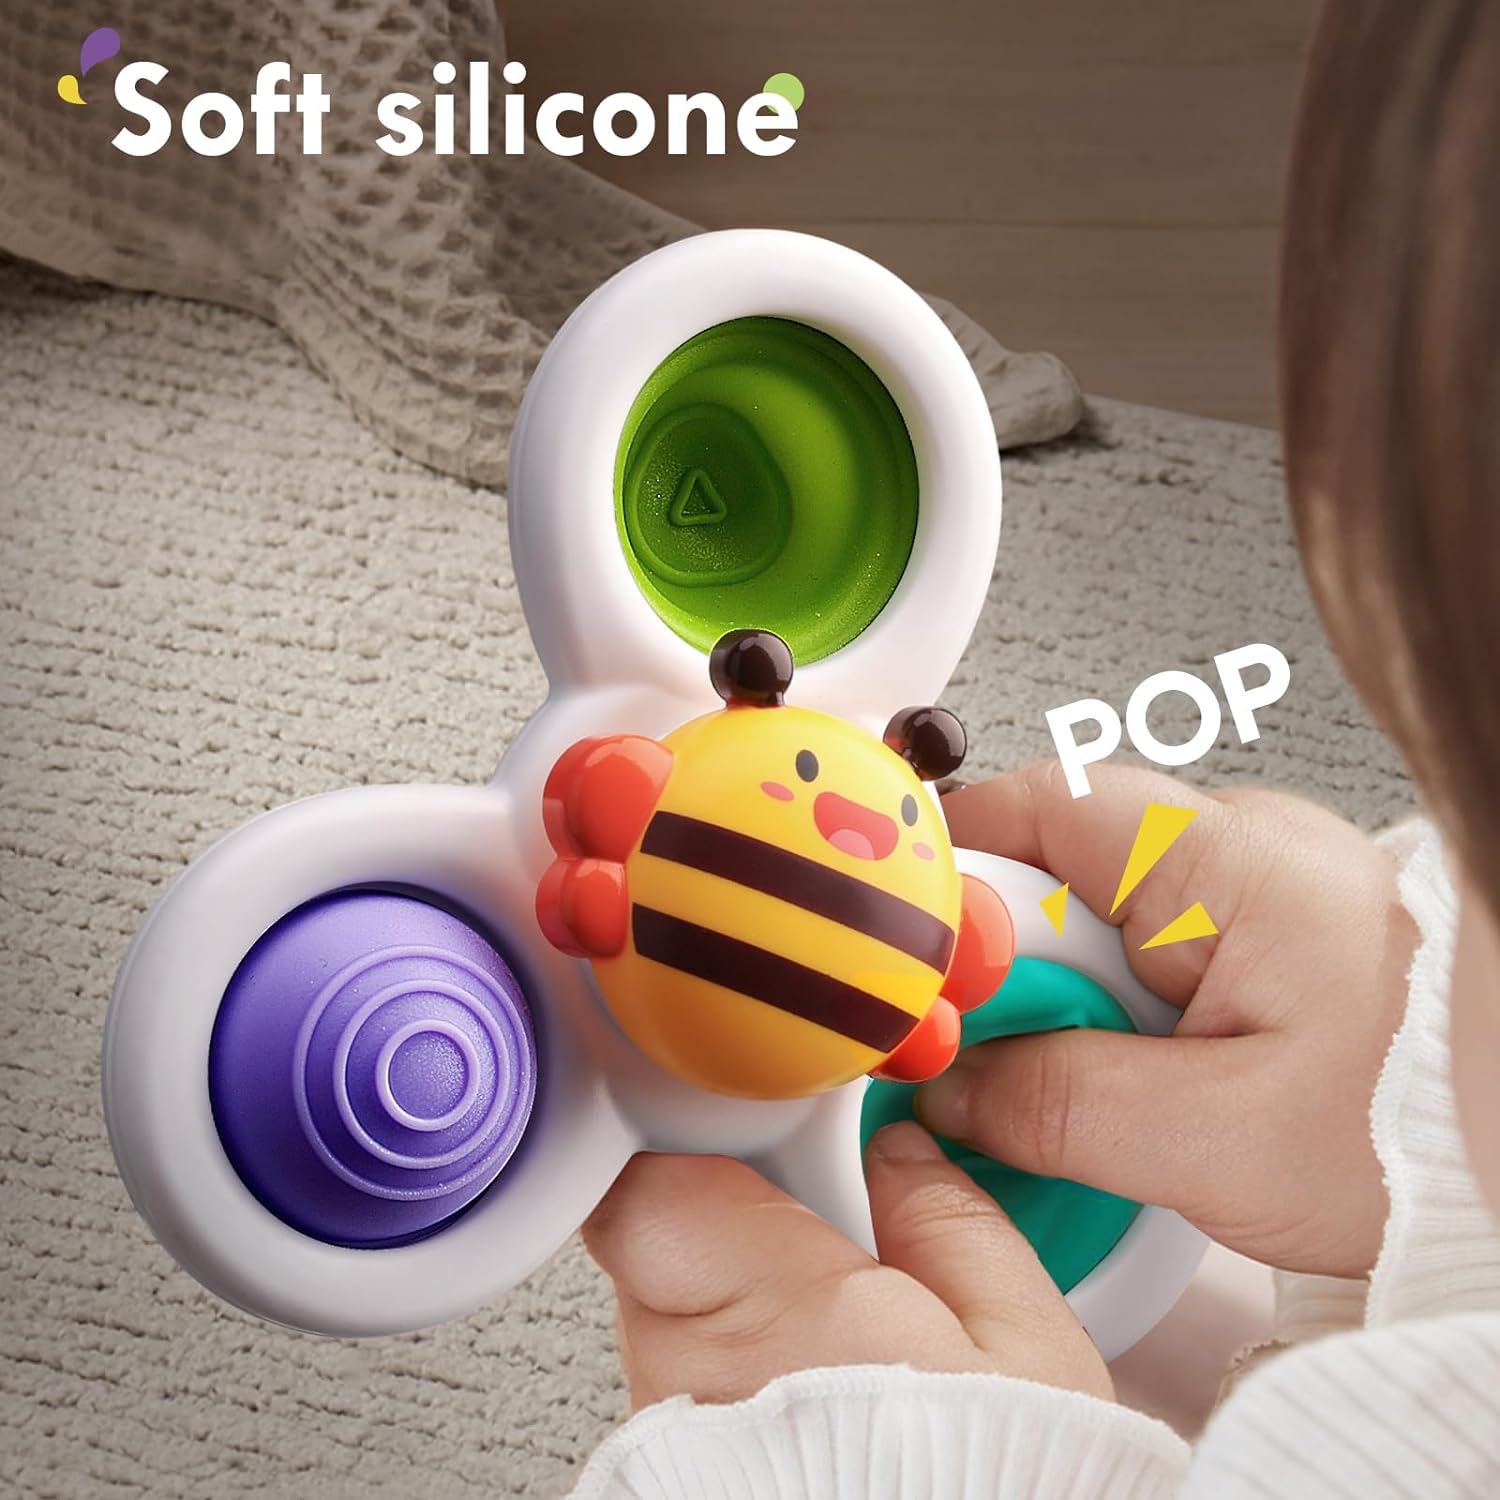 3PCS ALASOU Pop up Suction Cup Spinner Toys for Baby Christmas Stocking Stuffers Gifts|Novelty Spinning Tops Bath Toys for Kids Ages 1-3|Sensory Toys for Toddlers 1-3 Year Old Boy Birthday Gift